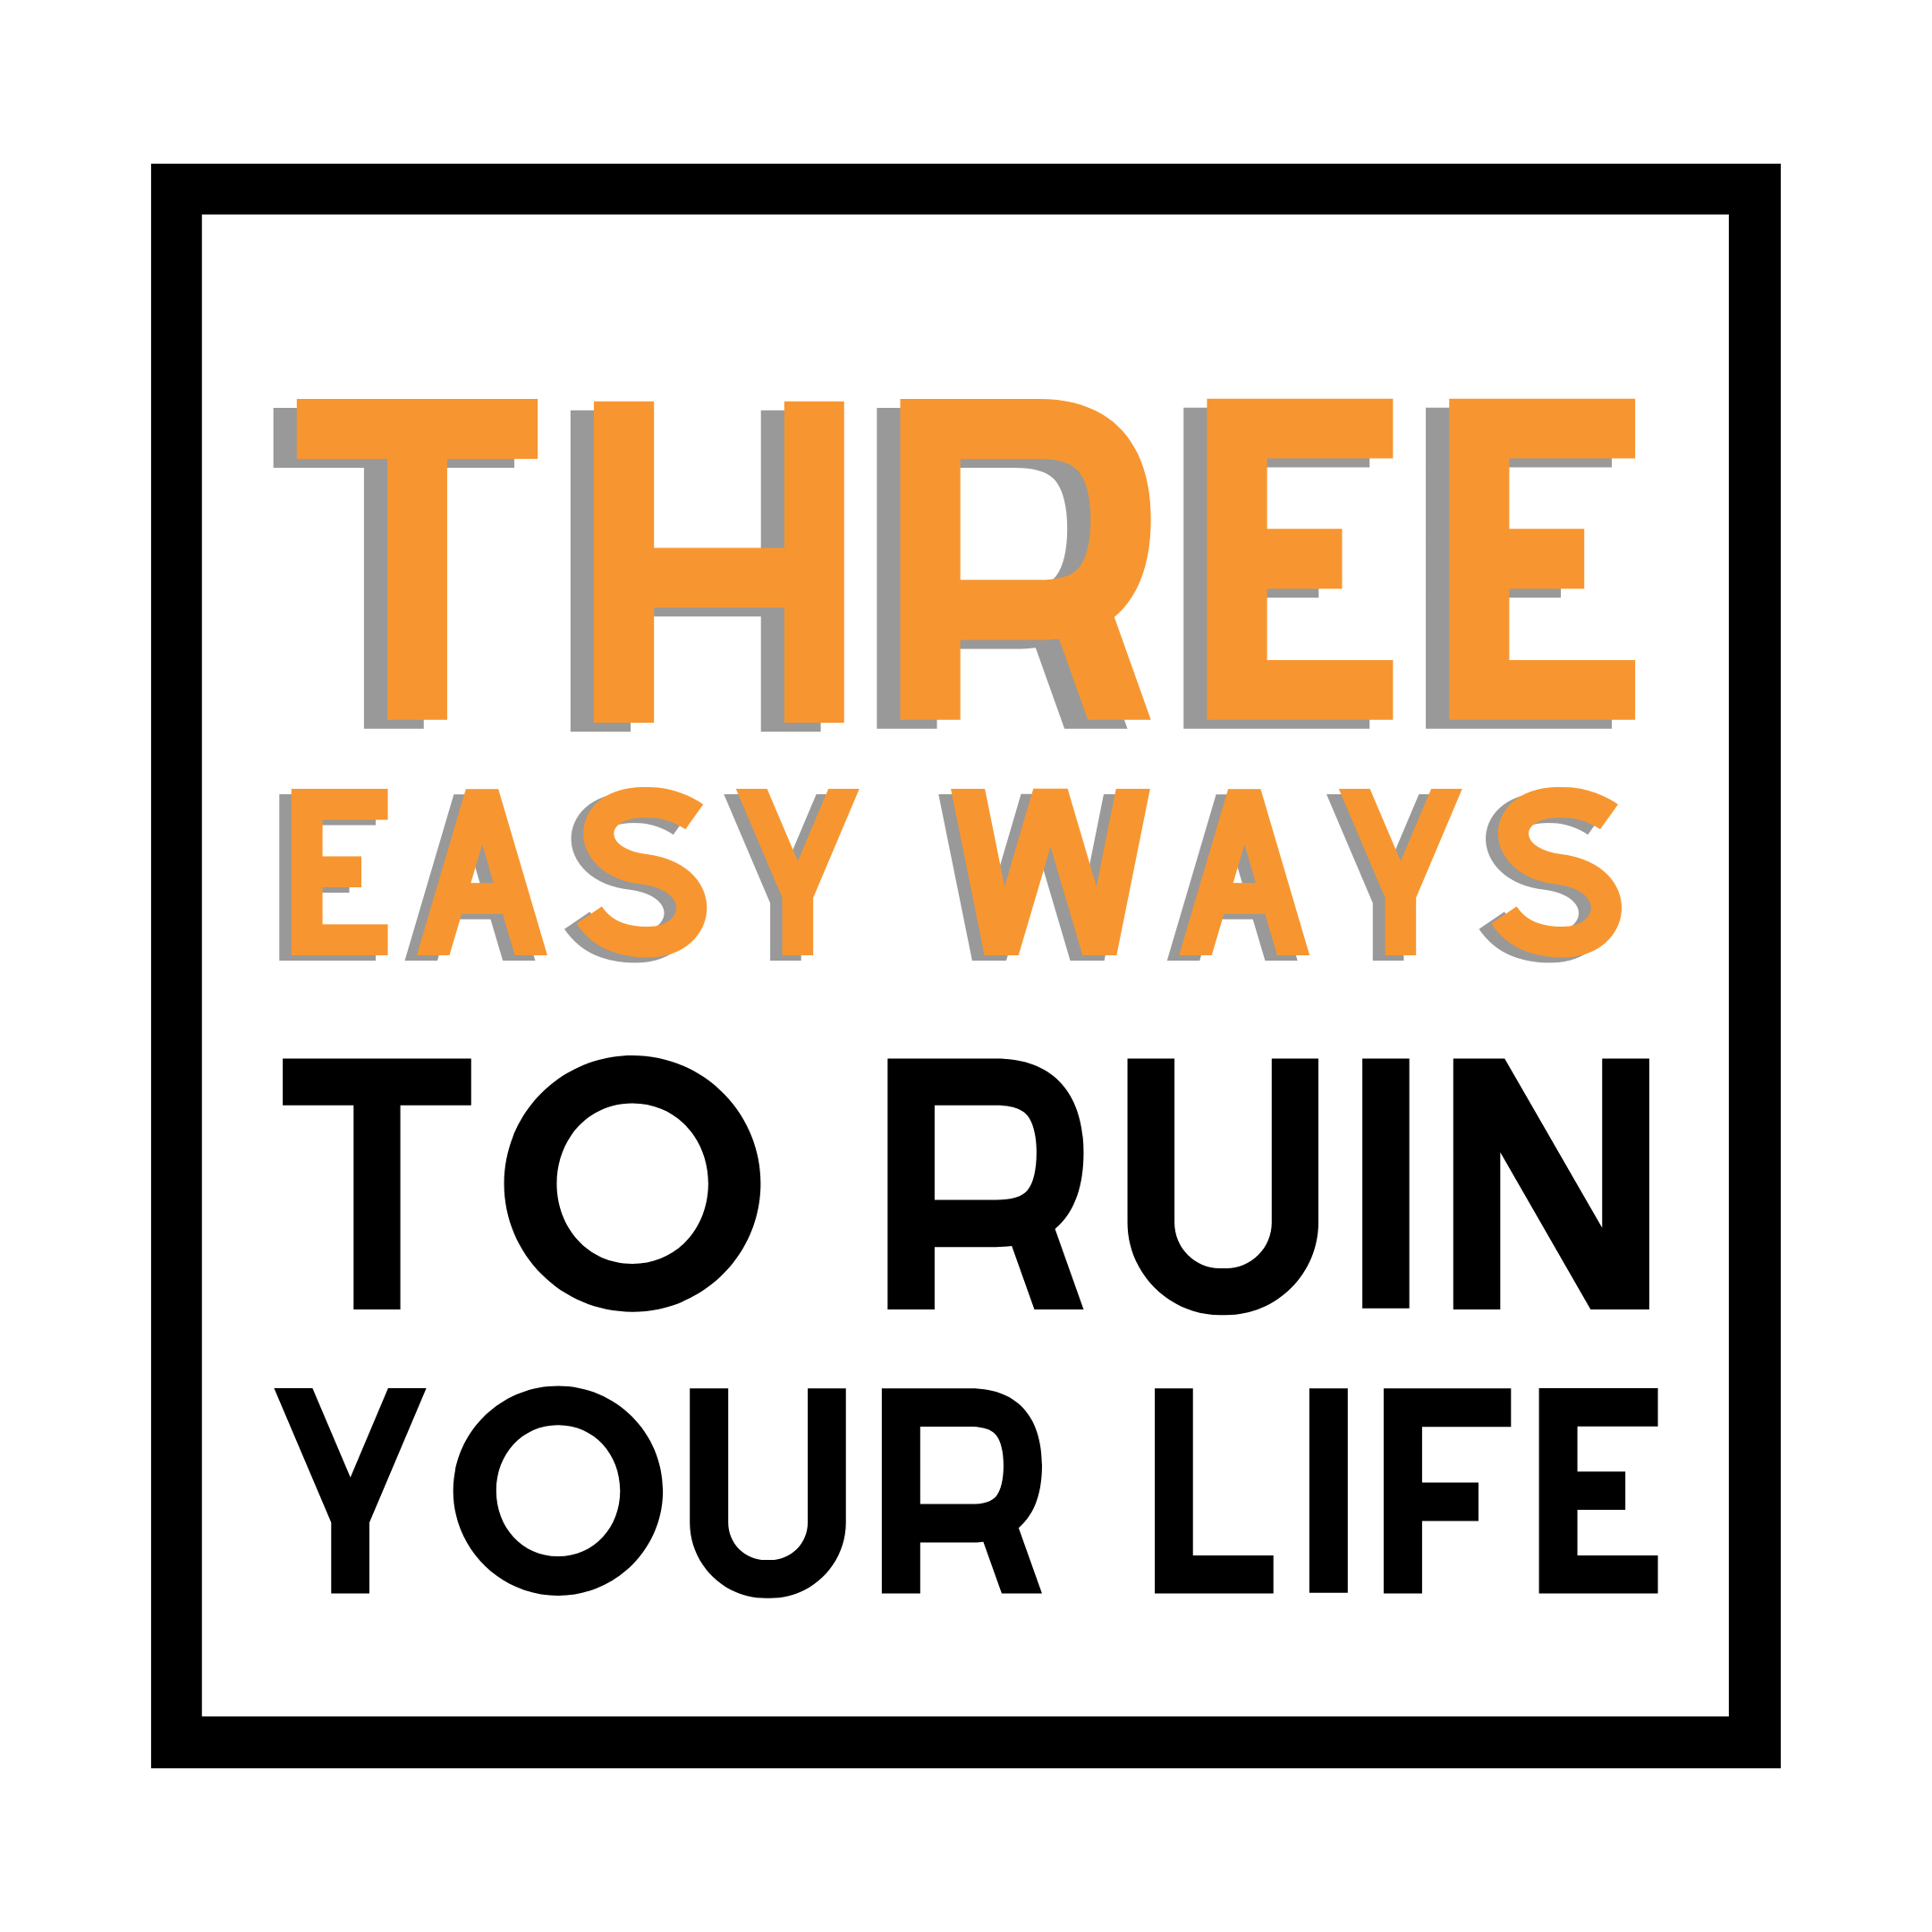 807-3-easy-ways-to-ruin-your-life-2-16468629844402.png